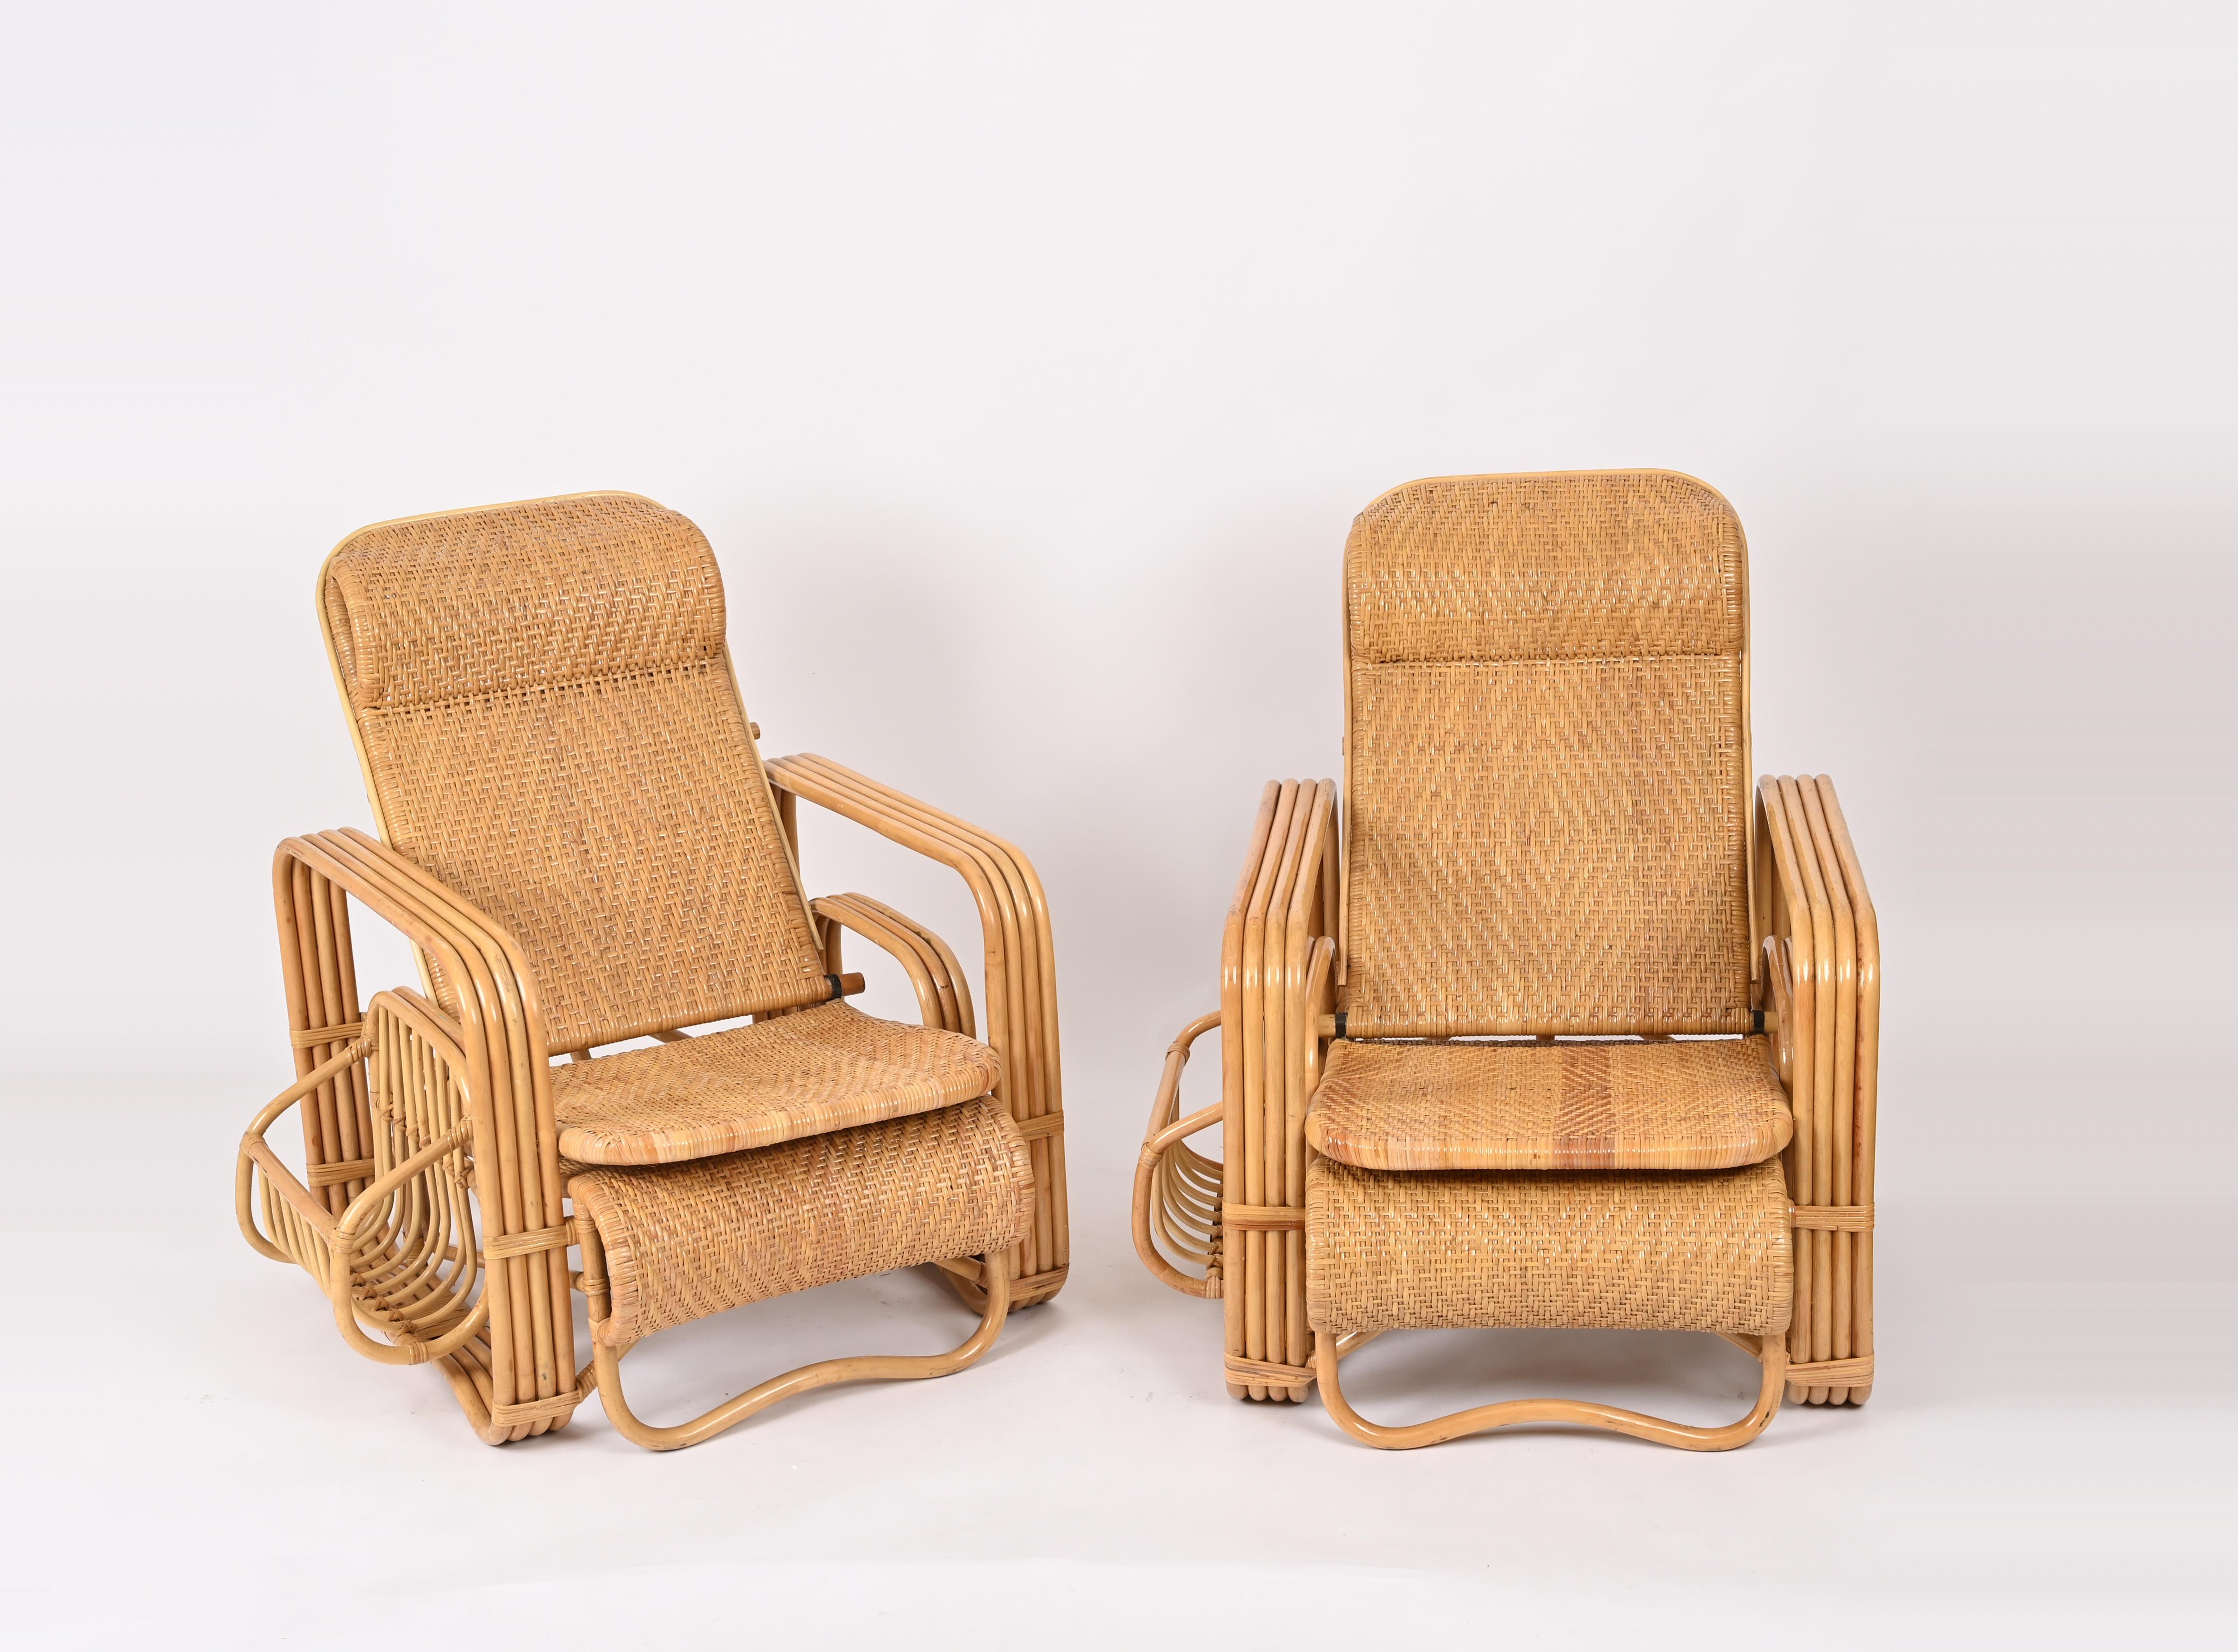 Bamboo Pair of Adjustable Chaise Longue / Lounge Chairs, Wicker and Rattan, Italy '70s  For Sale